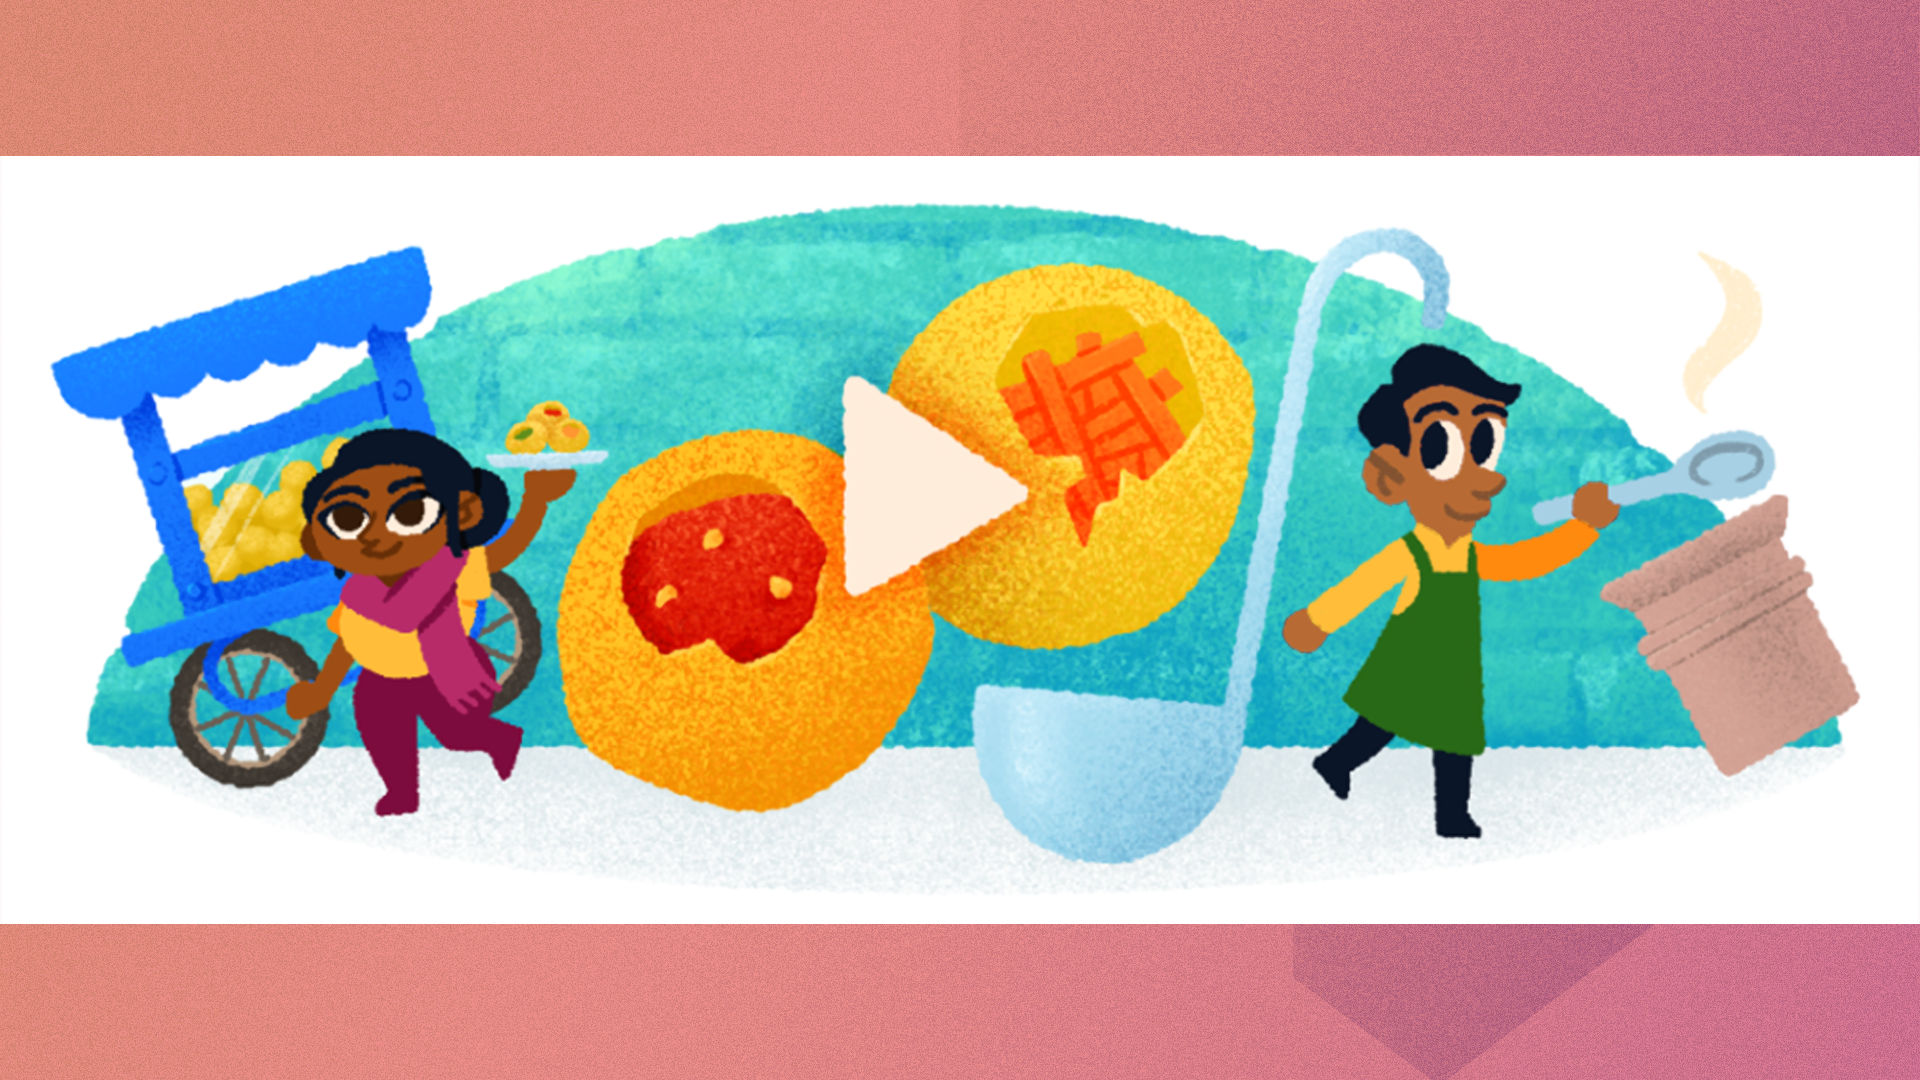 The best Google Doodle games and how to play them